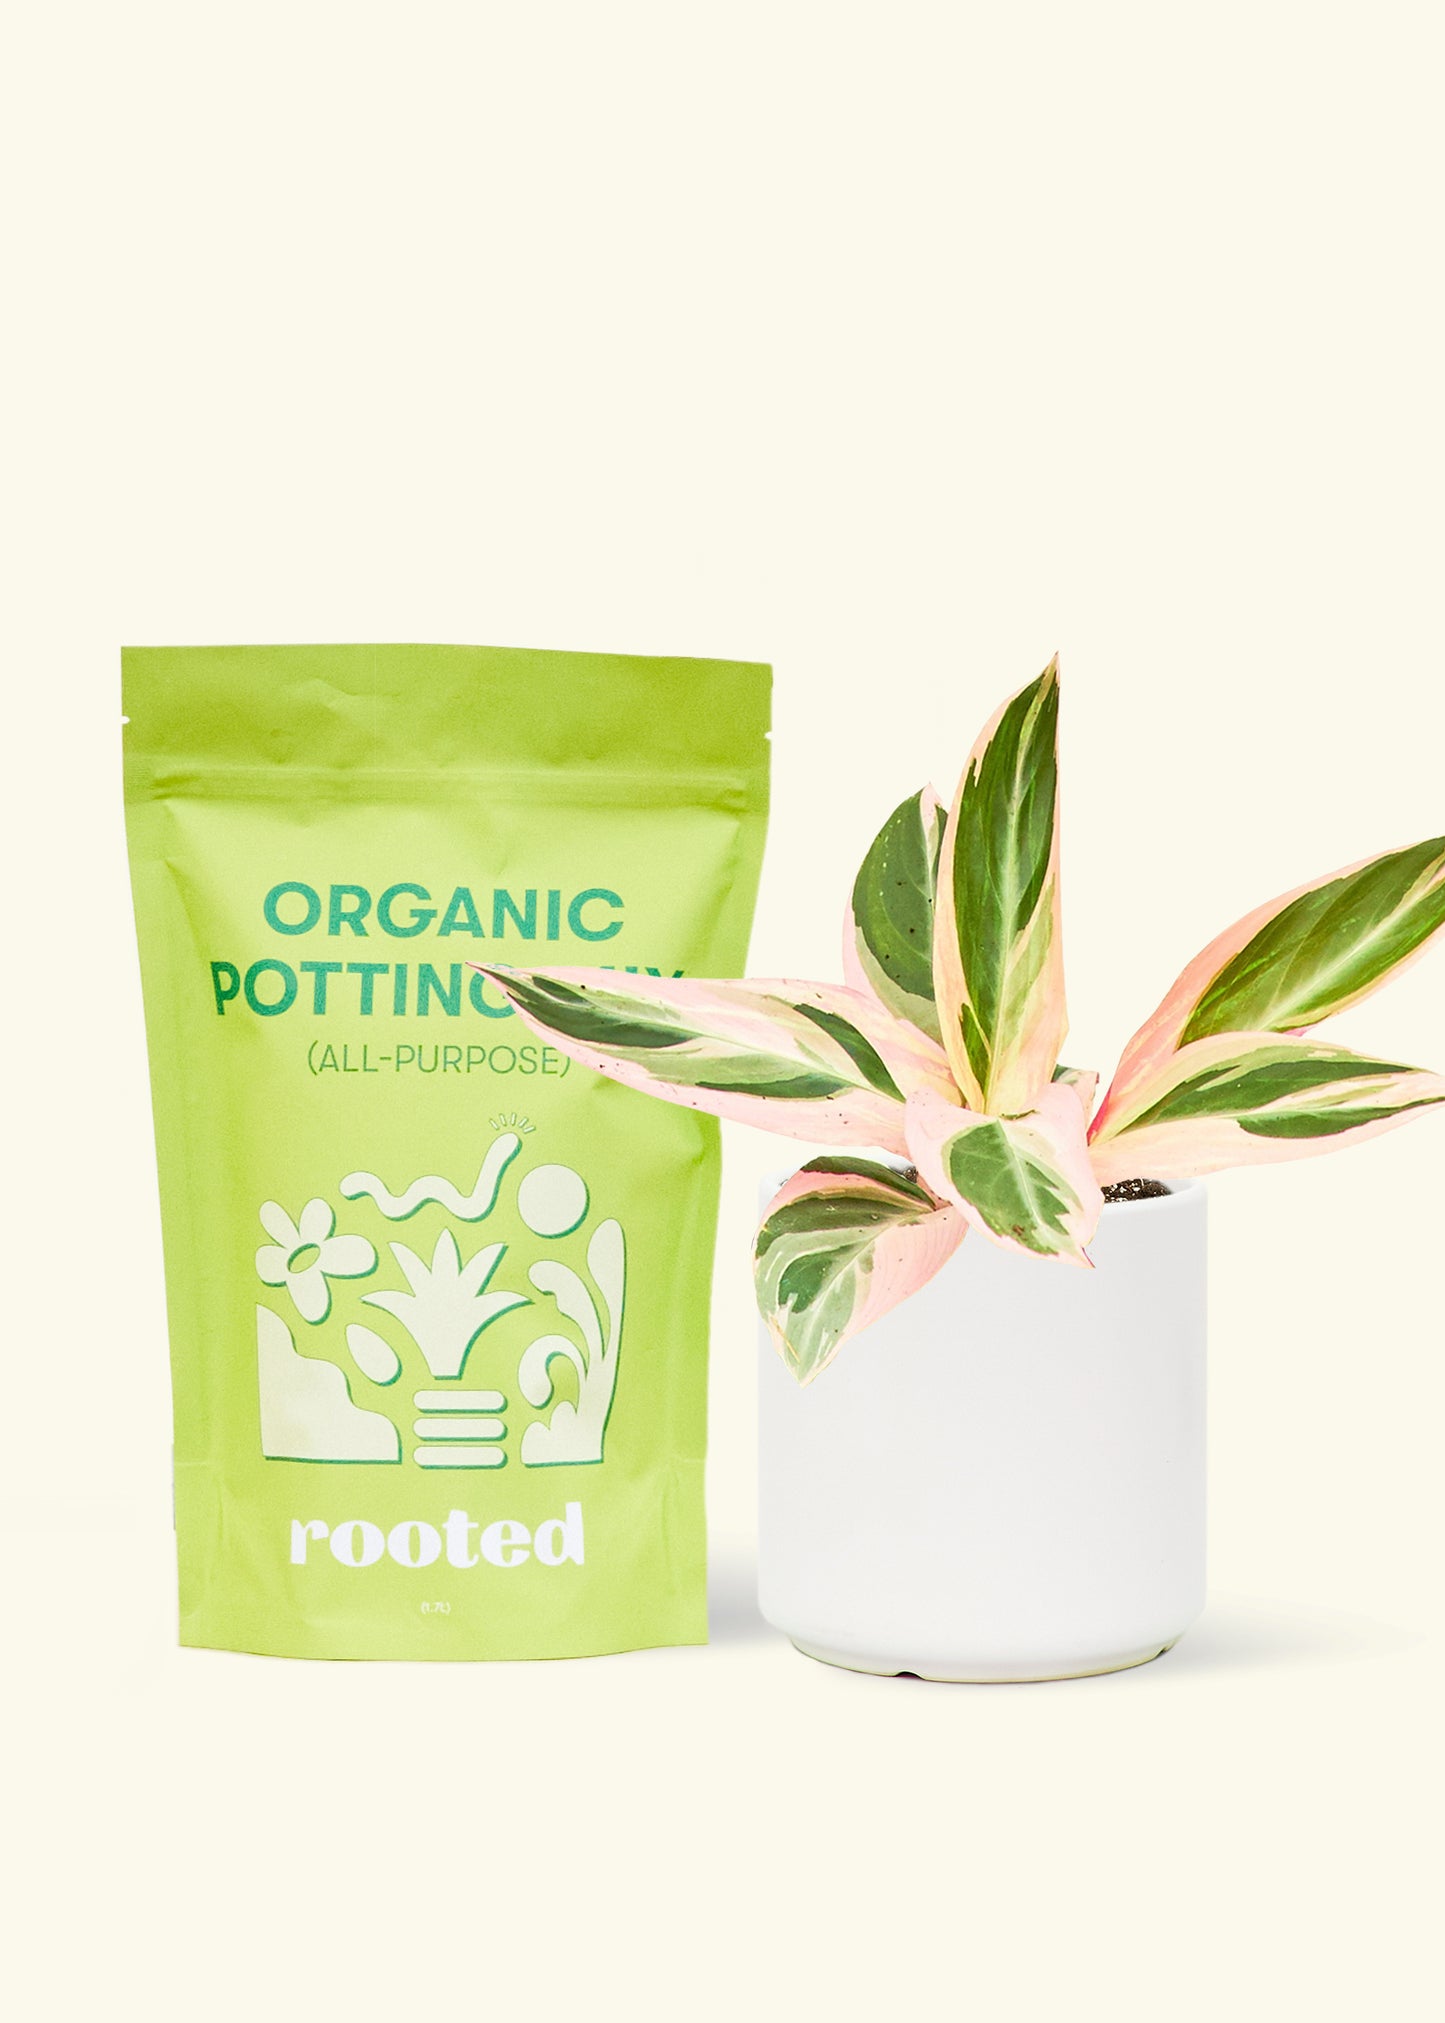 A bag of Organic Potting Mix to the left of a Stromanthe 'Triostar' in a white cylinder ceramic pot.